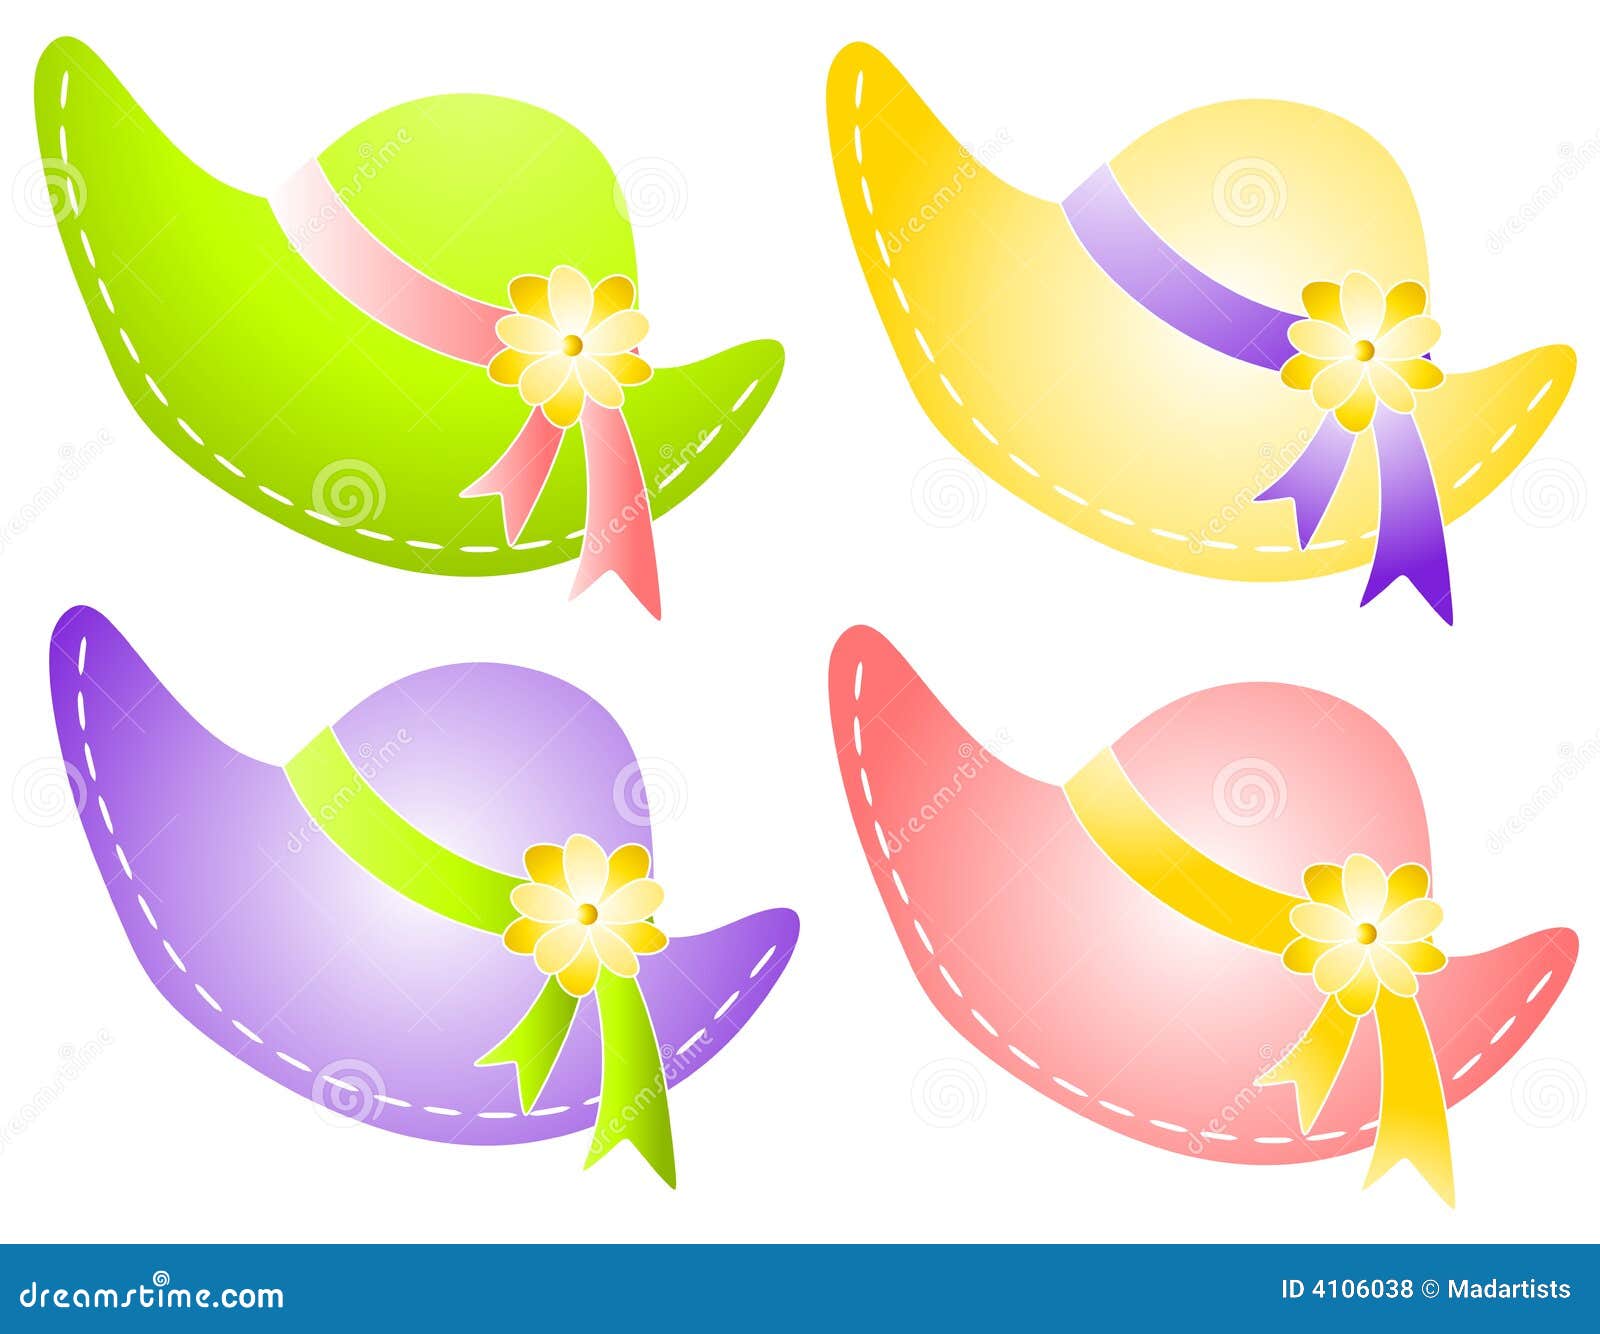 clipart spring hats - photo #22